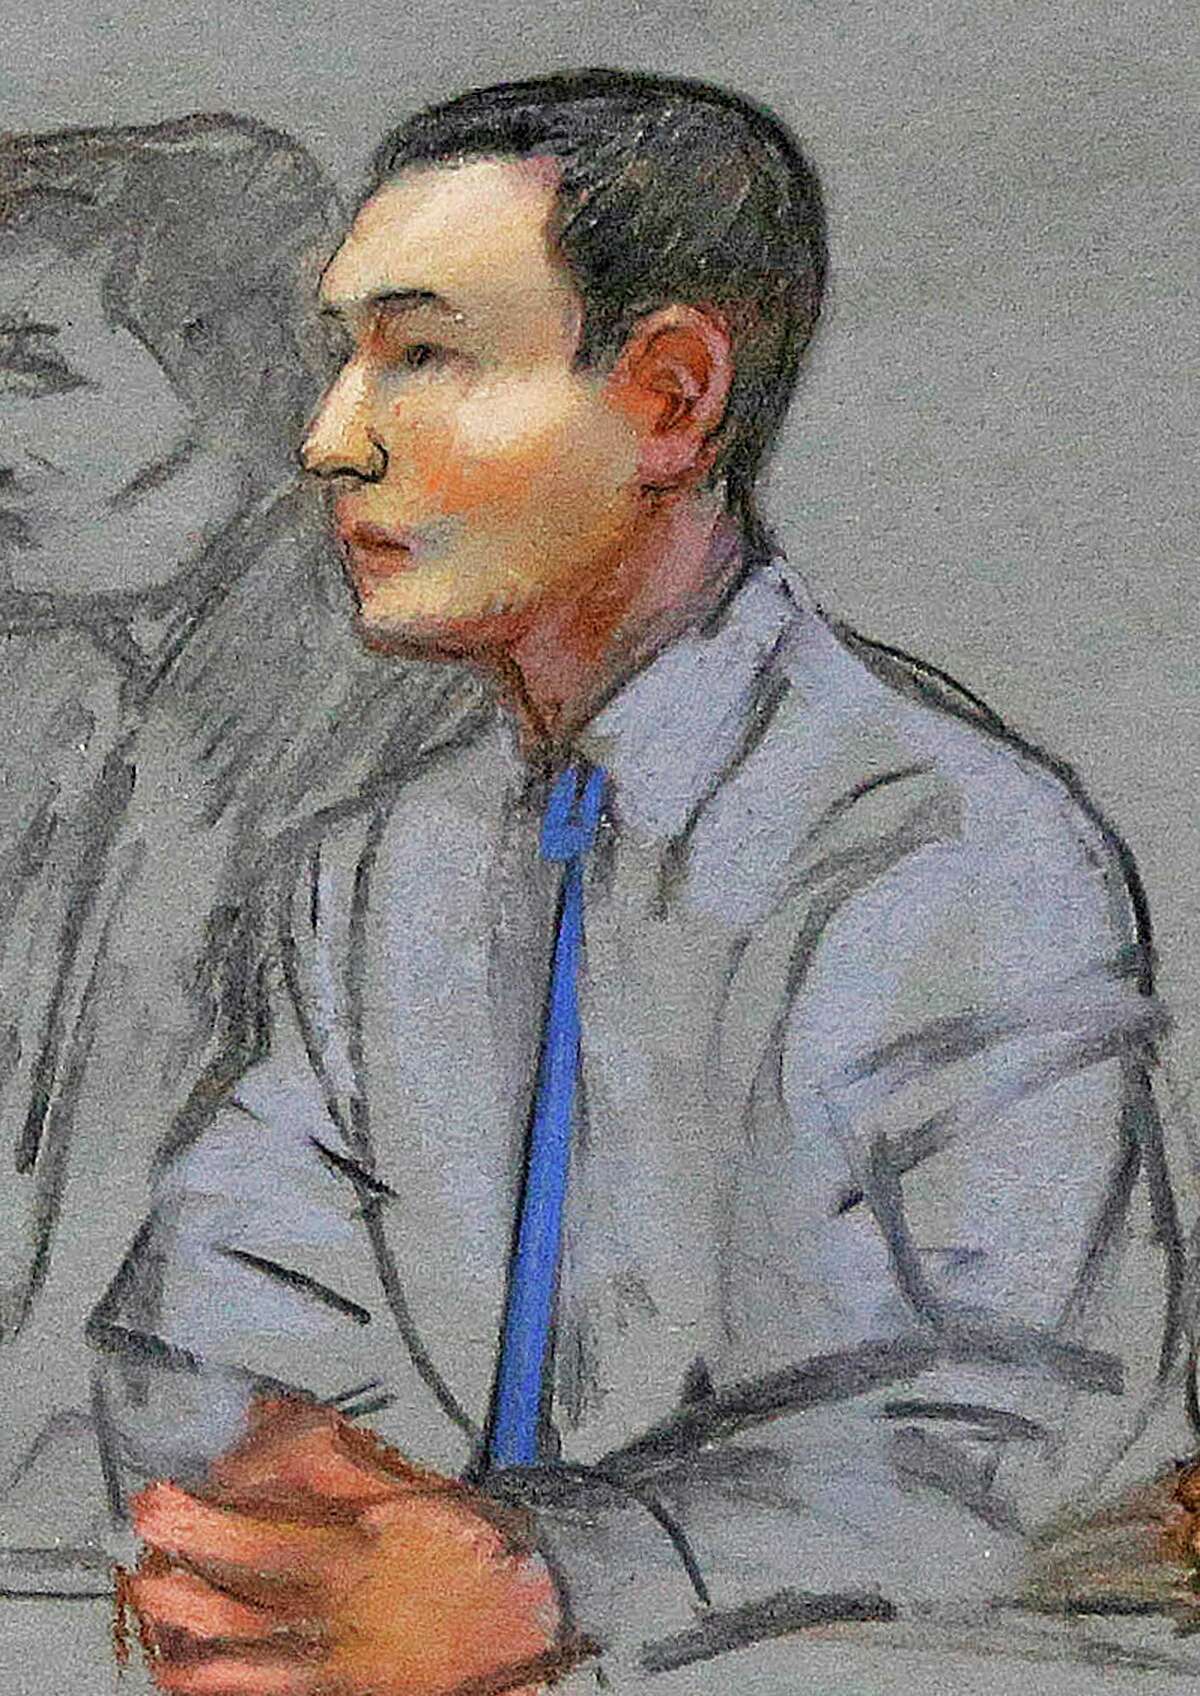 FILE - In this May 13, 2014 file courtroom sketch, defendant Azamat Tazhayakov, a college friend of Boston Marathon bombing suspect Dzhokhar Tsarnaev, sits during a hearing in federal court in Boston. (AP Photo/Jane Flavell Collins, File)